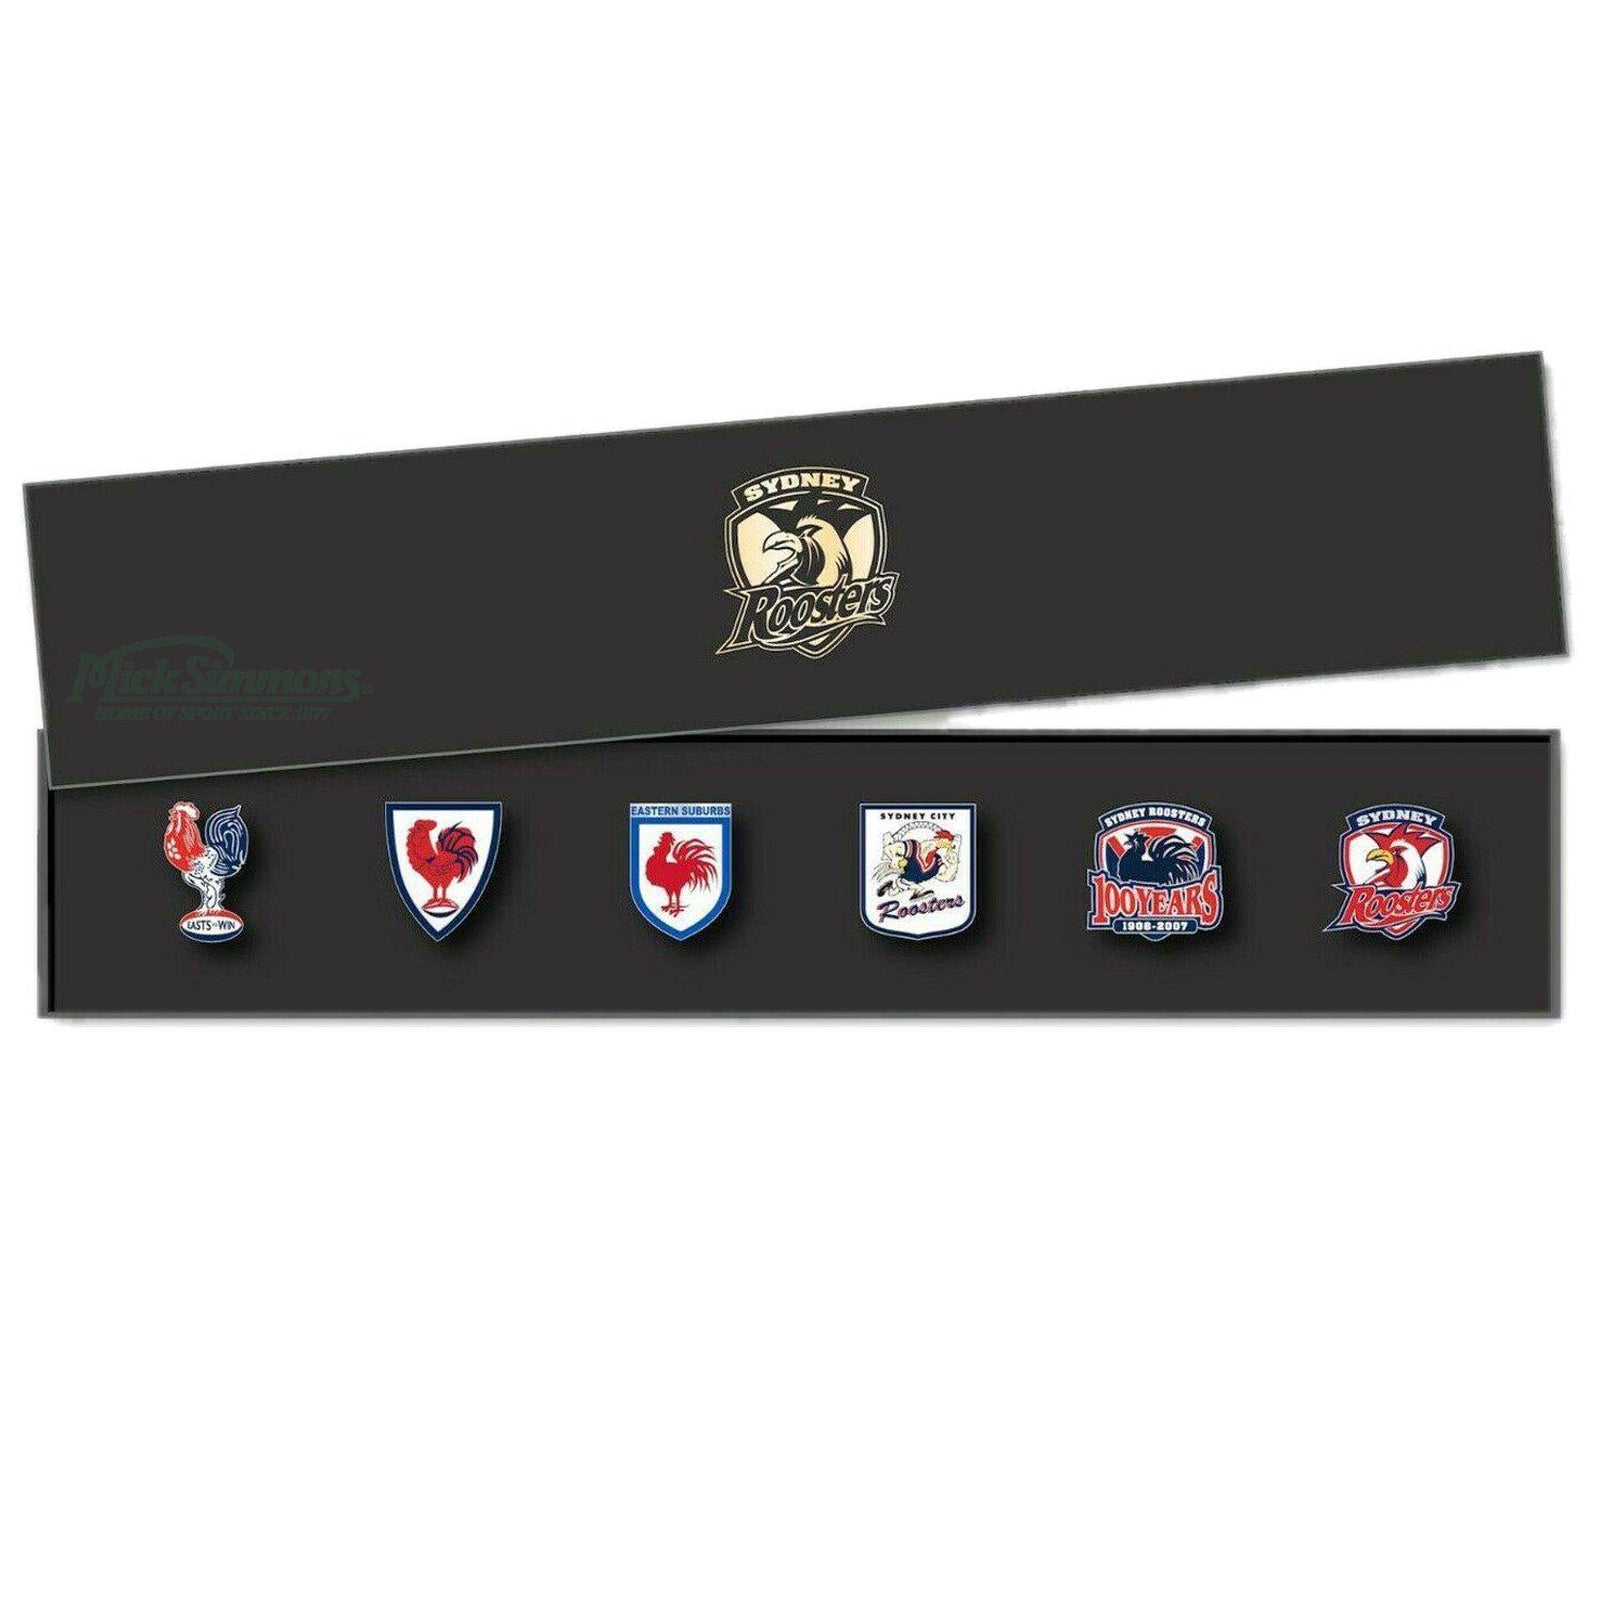 Sydney Roosters NRL Evolution Series Collection Set Team Metal Logo Pin Badge Mick Simmons Sport